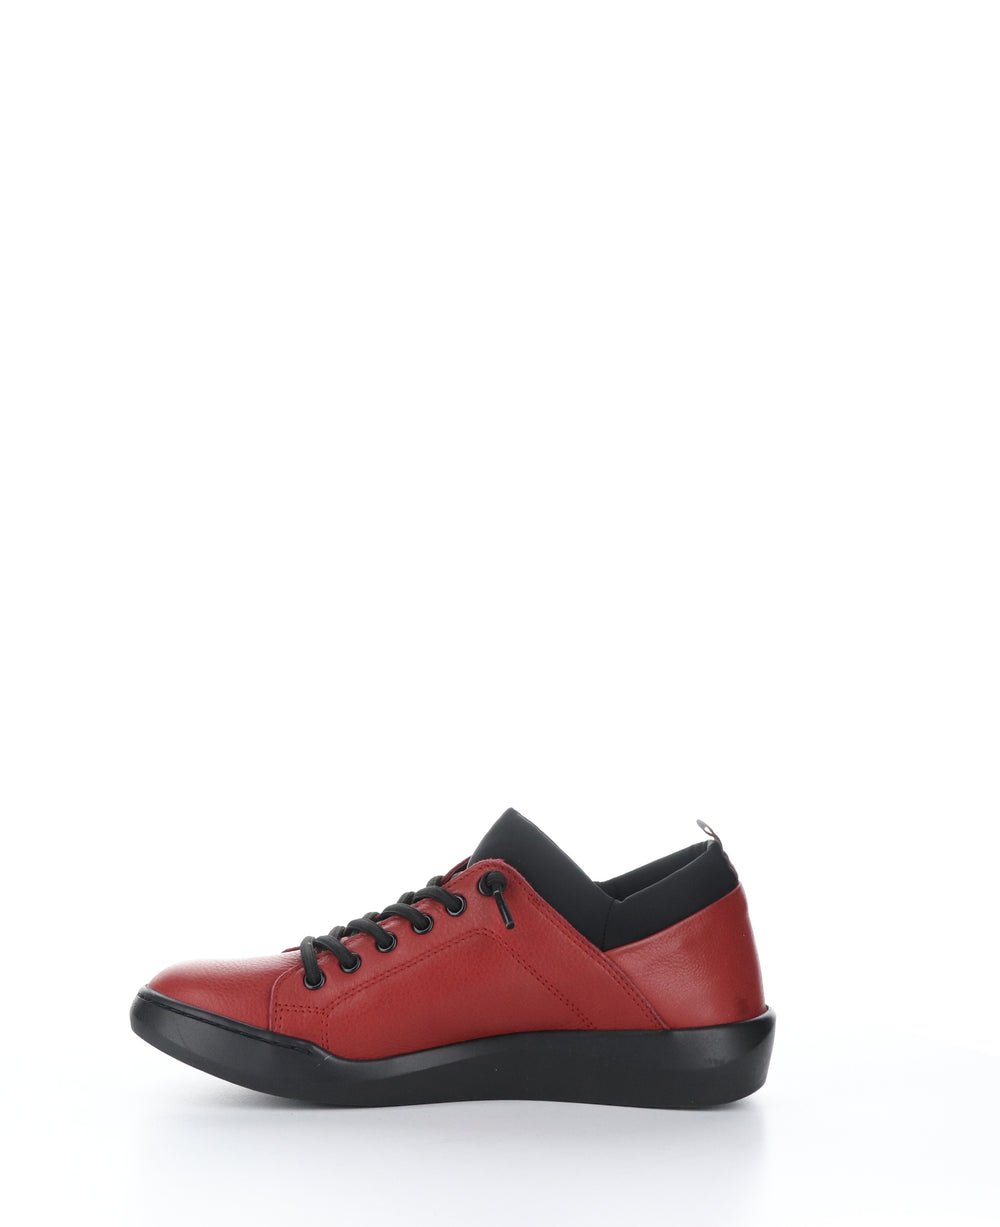 BONN667SOF Red Round Toe Shoes